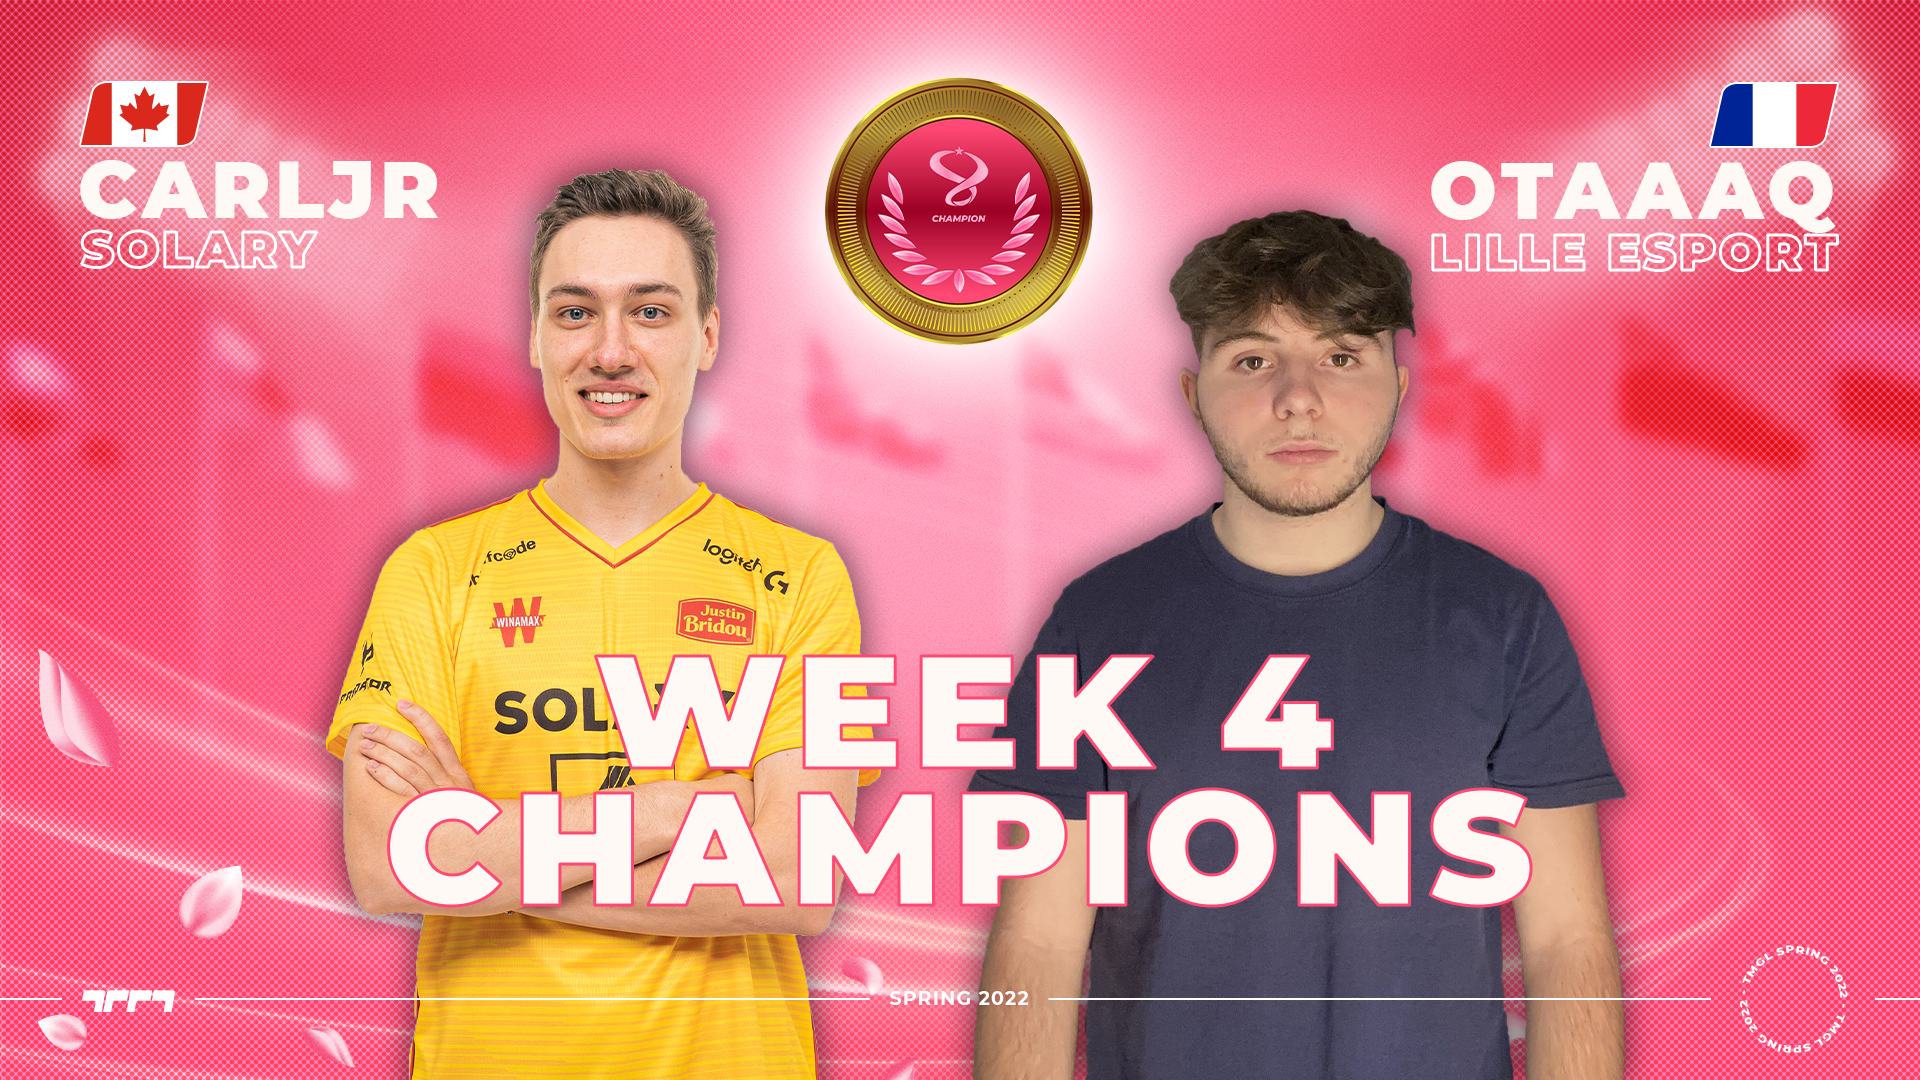 Champion medal for CarlJr and Otaaaq in Week 4